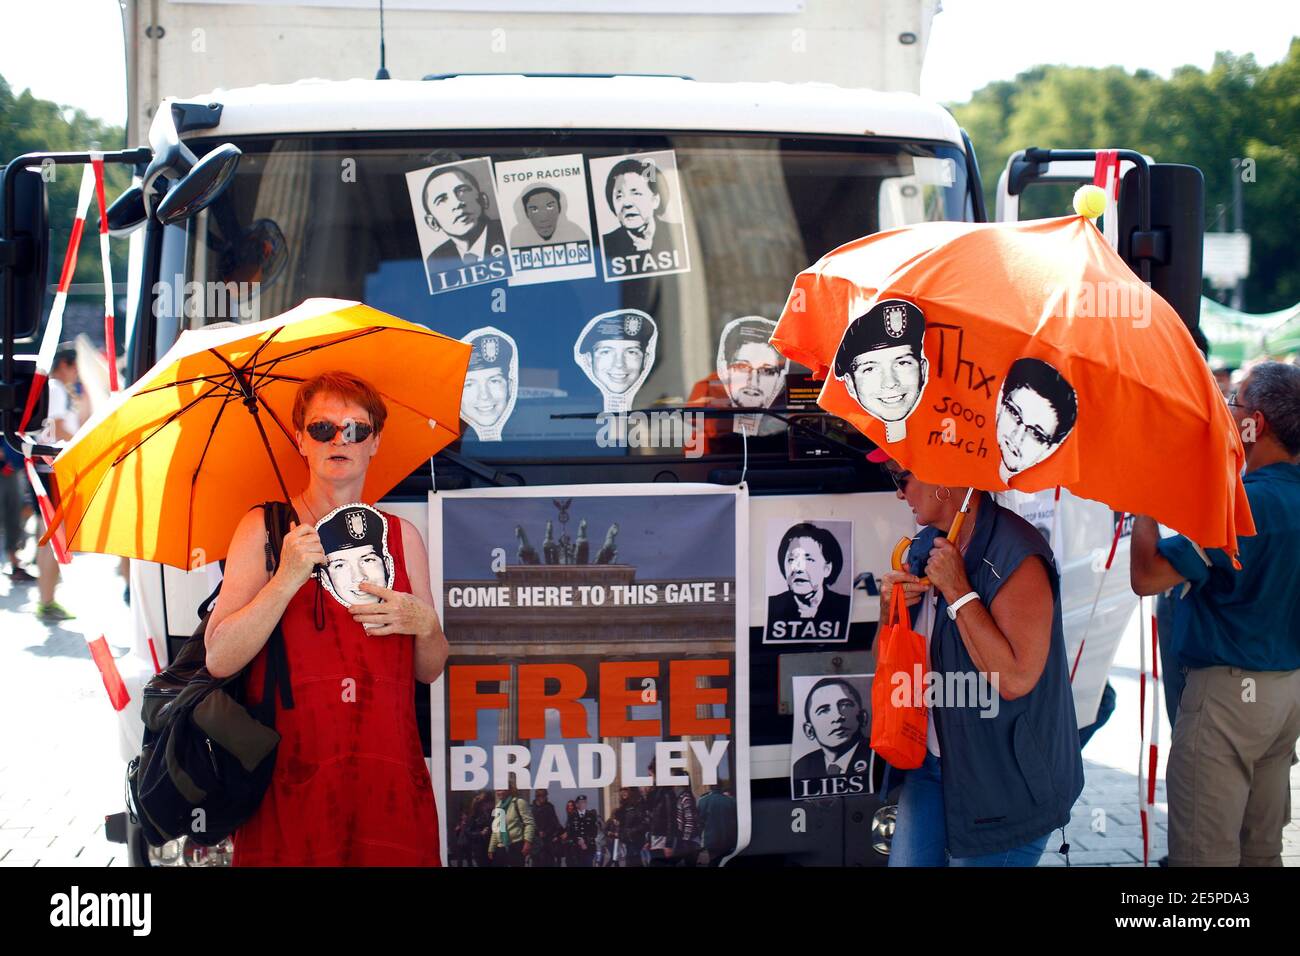 Protesters attend a demonstration against secret monitoring programmes PRISM, TEMPORA, INDECT and showing solidarity with whistleblowers Edward Snowden, Bradley Manning and others in Berlin July 27, 2013.  REUTERS/Pawel Kopczynski (GERMANY  - Tags: CRIME LAW POLITICS CIVIL UNREST) Stock Photo